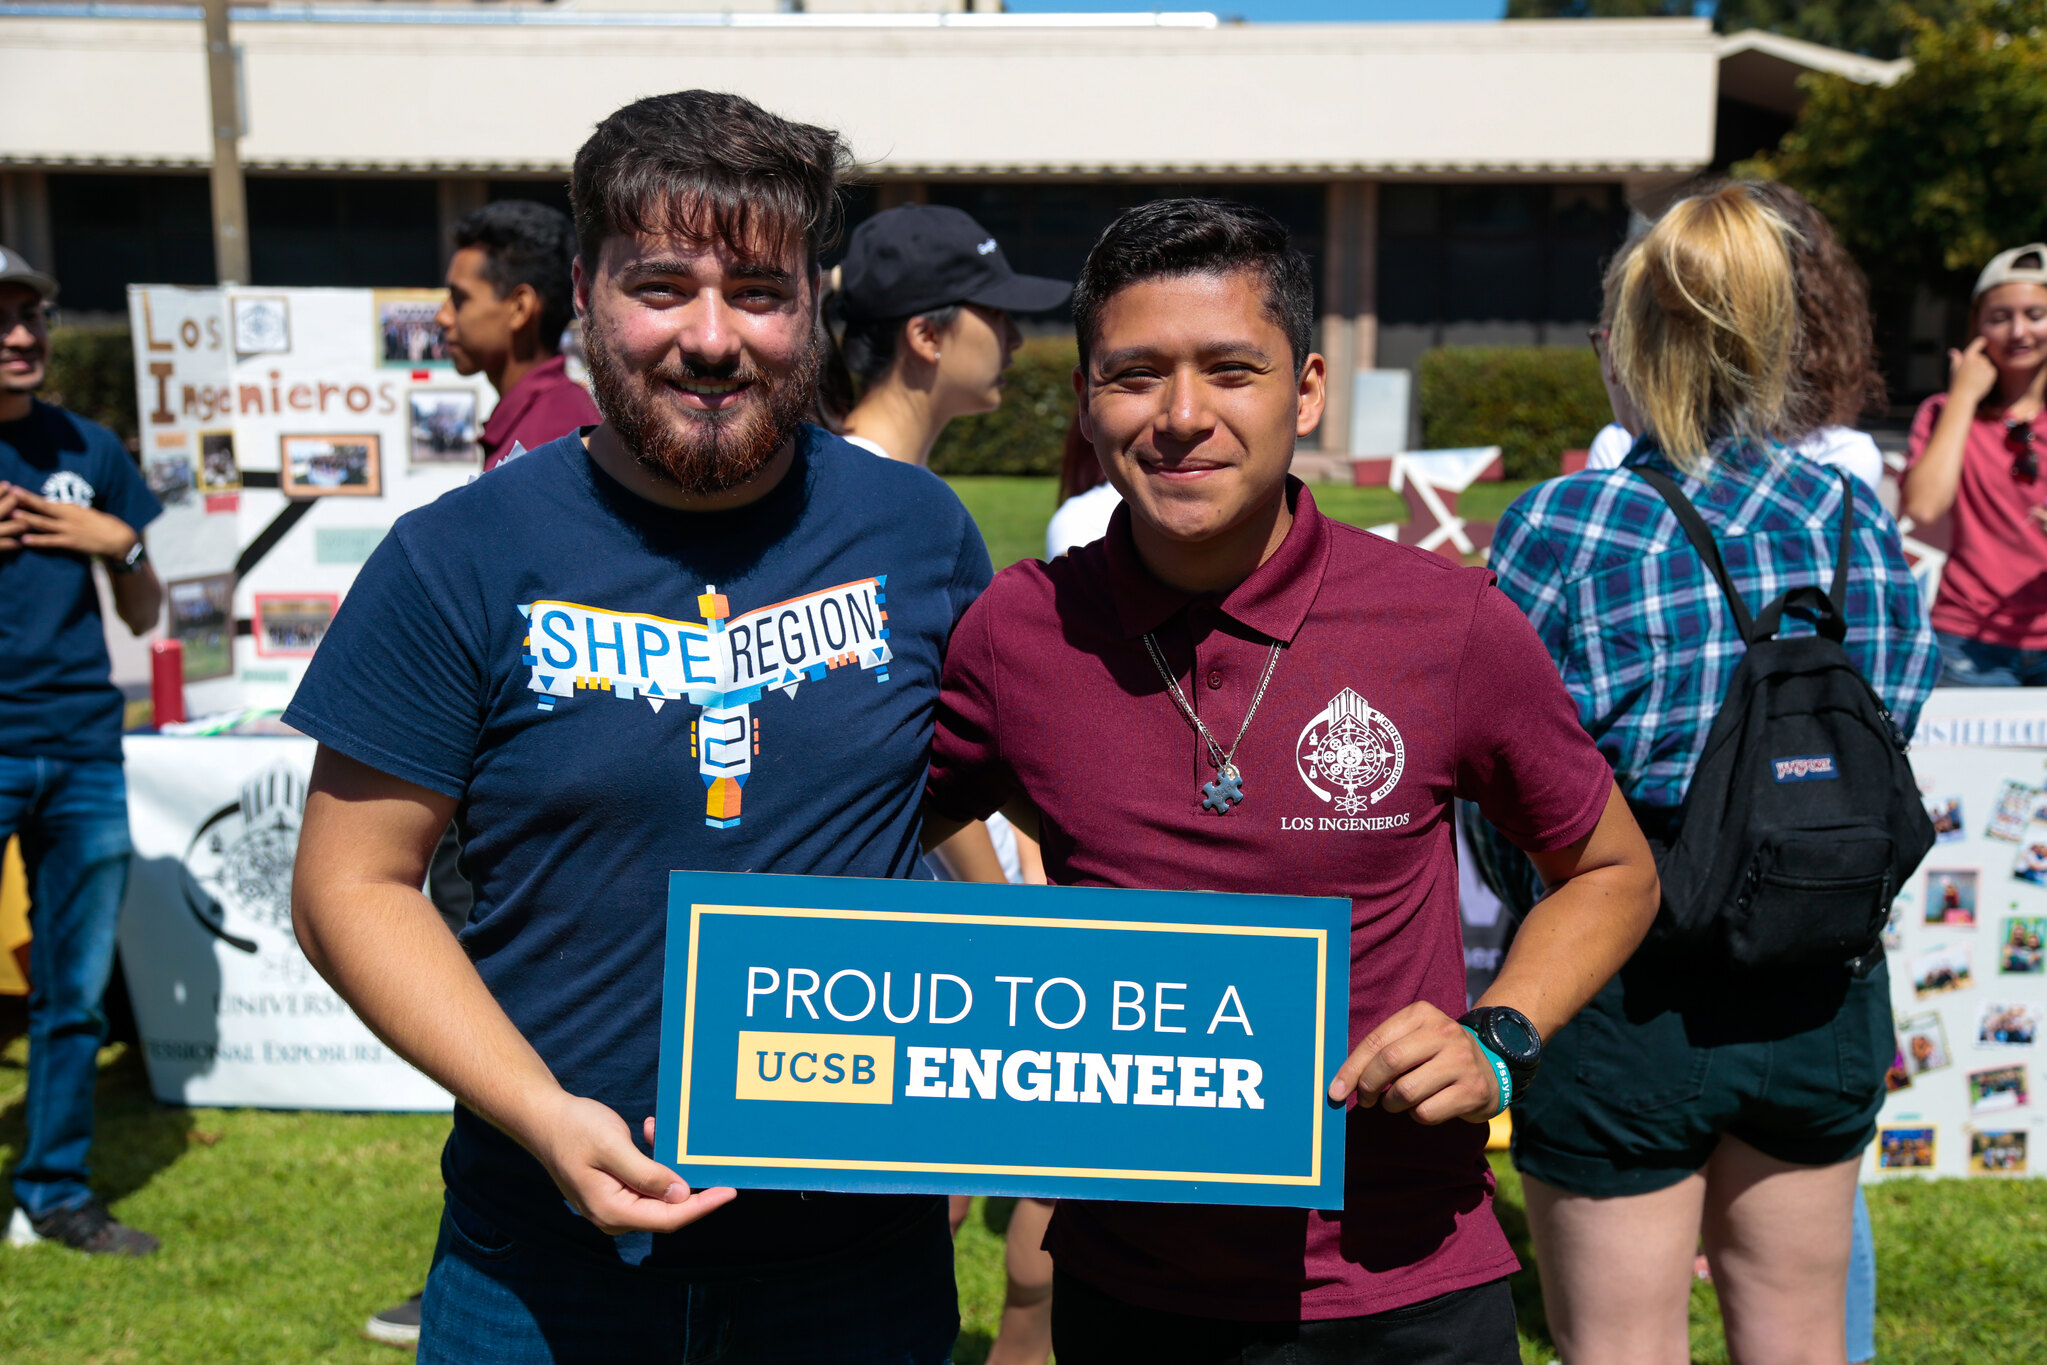 Students holding up "Proud to be a UCSB Engineer" sign